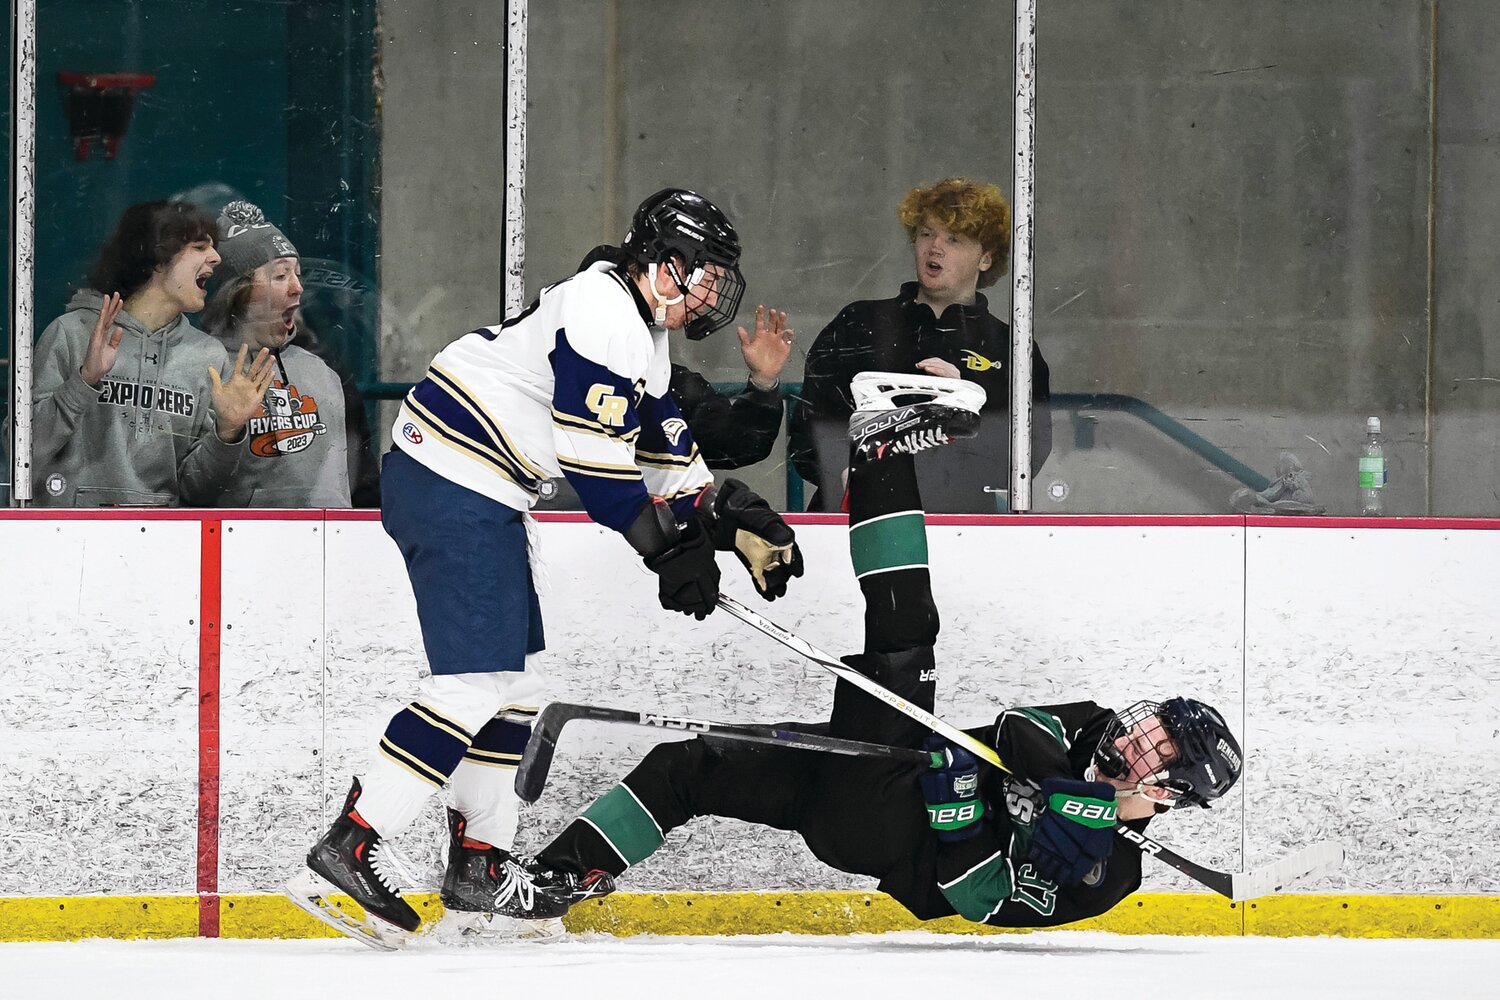 Council Rock South’s Gavin Nisenzon lays out Pennridge’s Nicholas Young and draws a penalty in the third period.